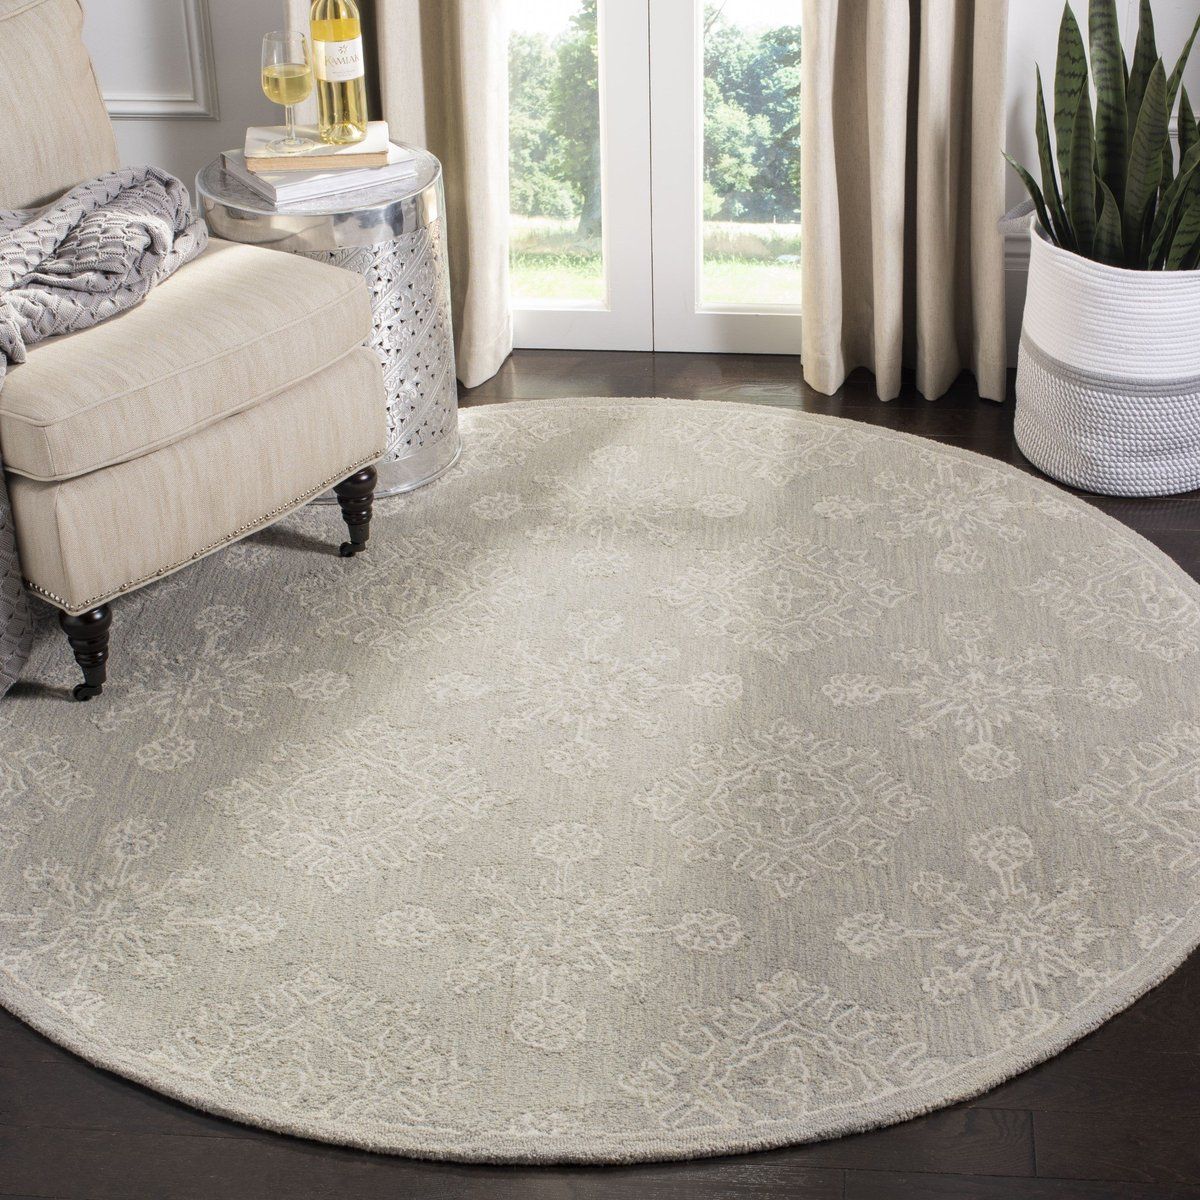 Safavieh Blossom Blm 950 Rugs | Rugs Direct Regarding Blossom Oval Rugs (View 15 of 15)